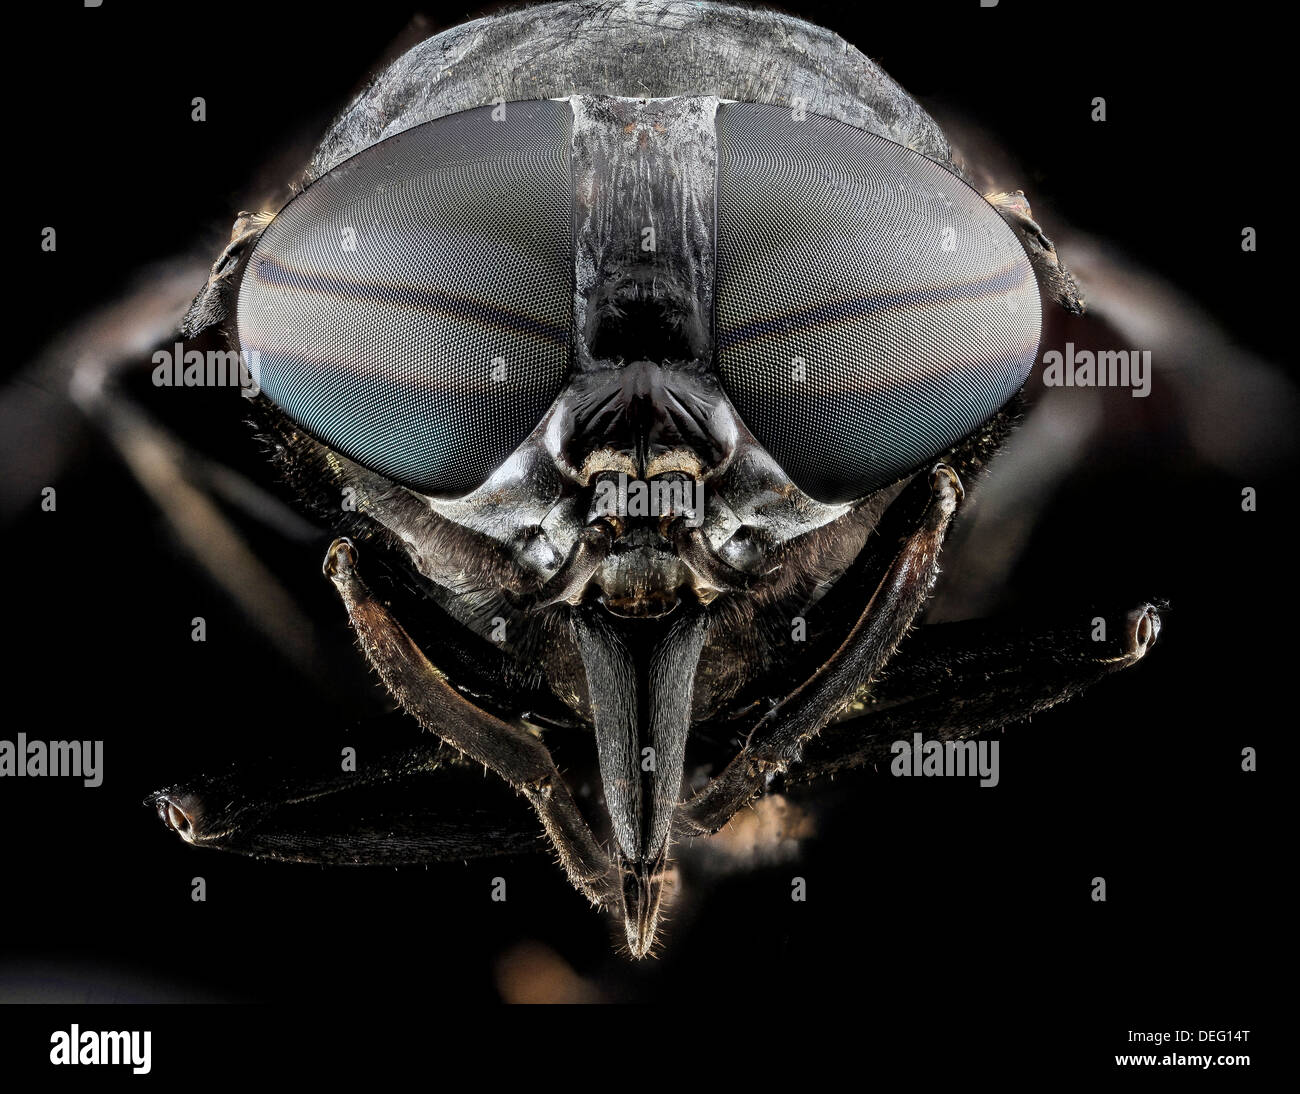 Macro view of the head of a Black Horse Fly, Tabanus atratus, primarily found in the eastern United States. Black Horse Flies have large compound eyes, which are separated in females, and continuous in males. They have prominent mouthparts, which are easily distinguishable: The fascicle is made of six piercing organs. Starting from the outside, there are 2 flattened, bladelike mandibles with tooth like serrations used for cutting. Two narrow maxillae also serrated used to pierce the tissue and blood vessels of the host, a median hypopharynx and a median labrum-epipharynx. Stock Photo